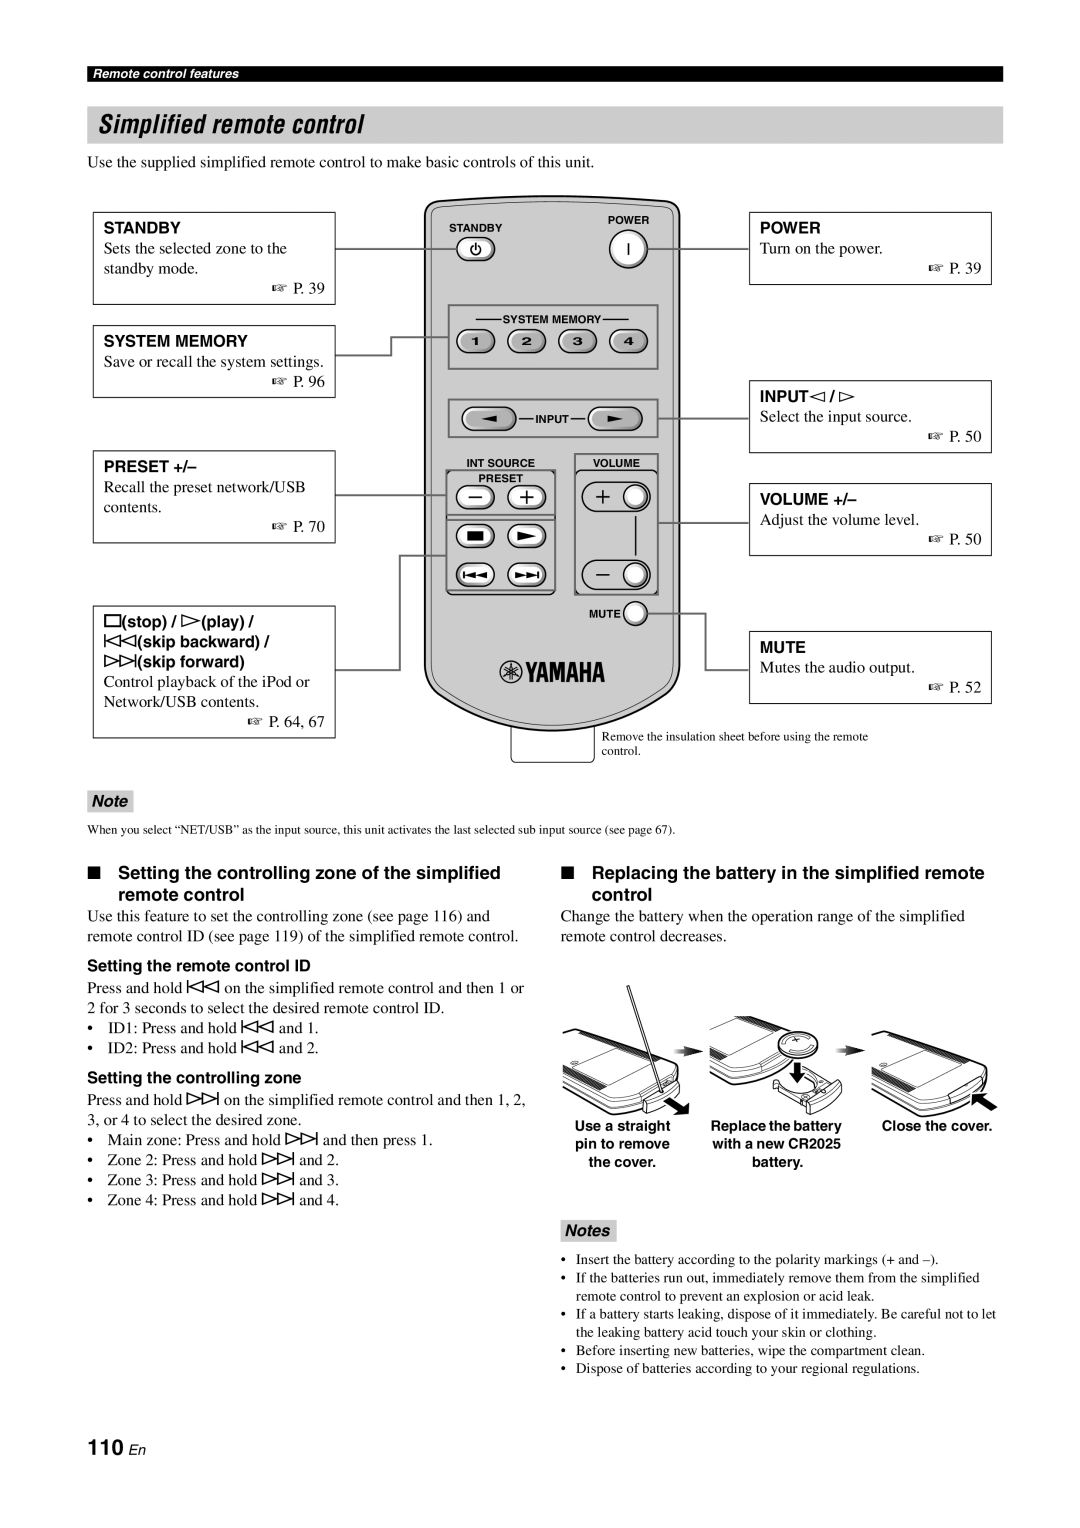 Yamaha DSP-Z11 owner manual Simplified remote control, 110 En, Setting the controlling zone of the simplified 